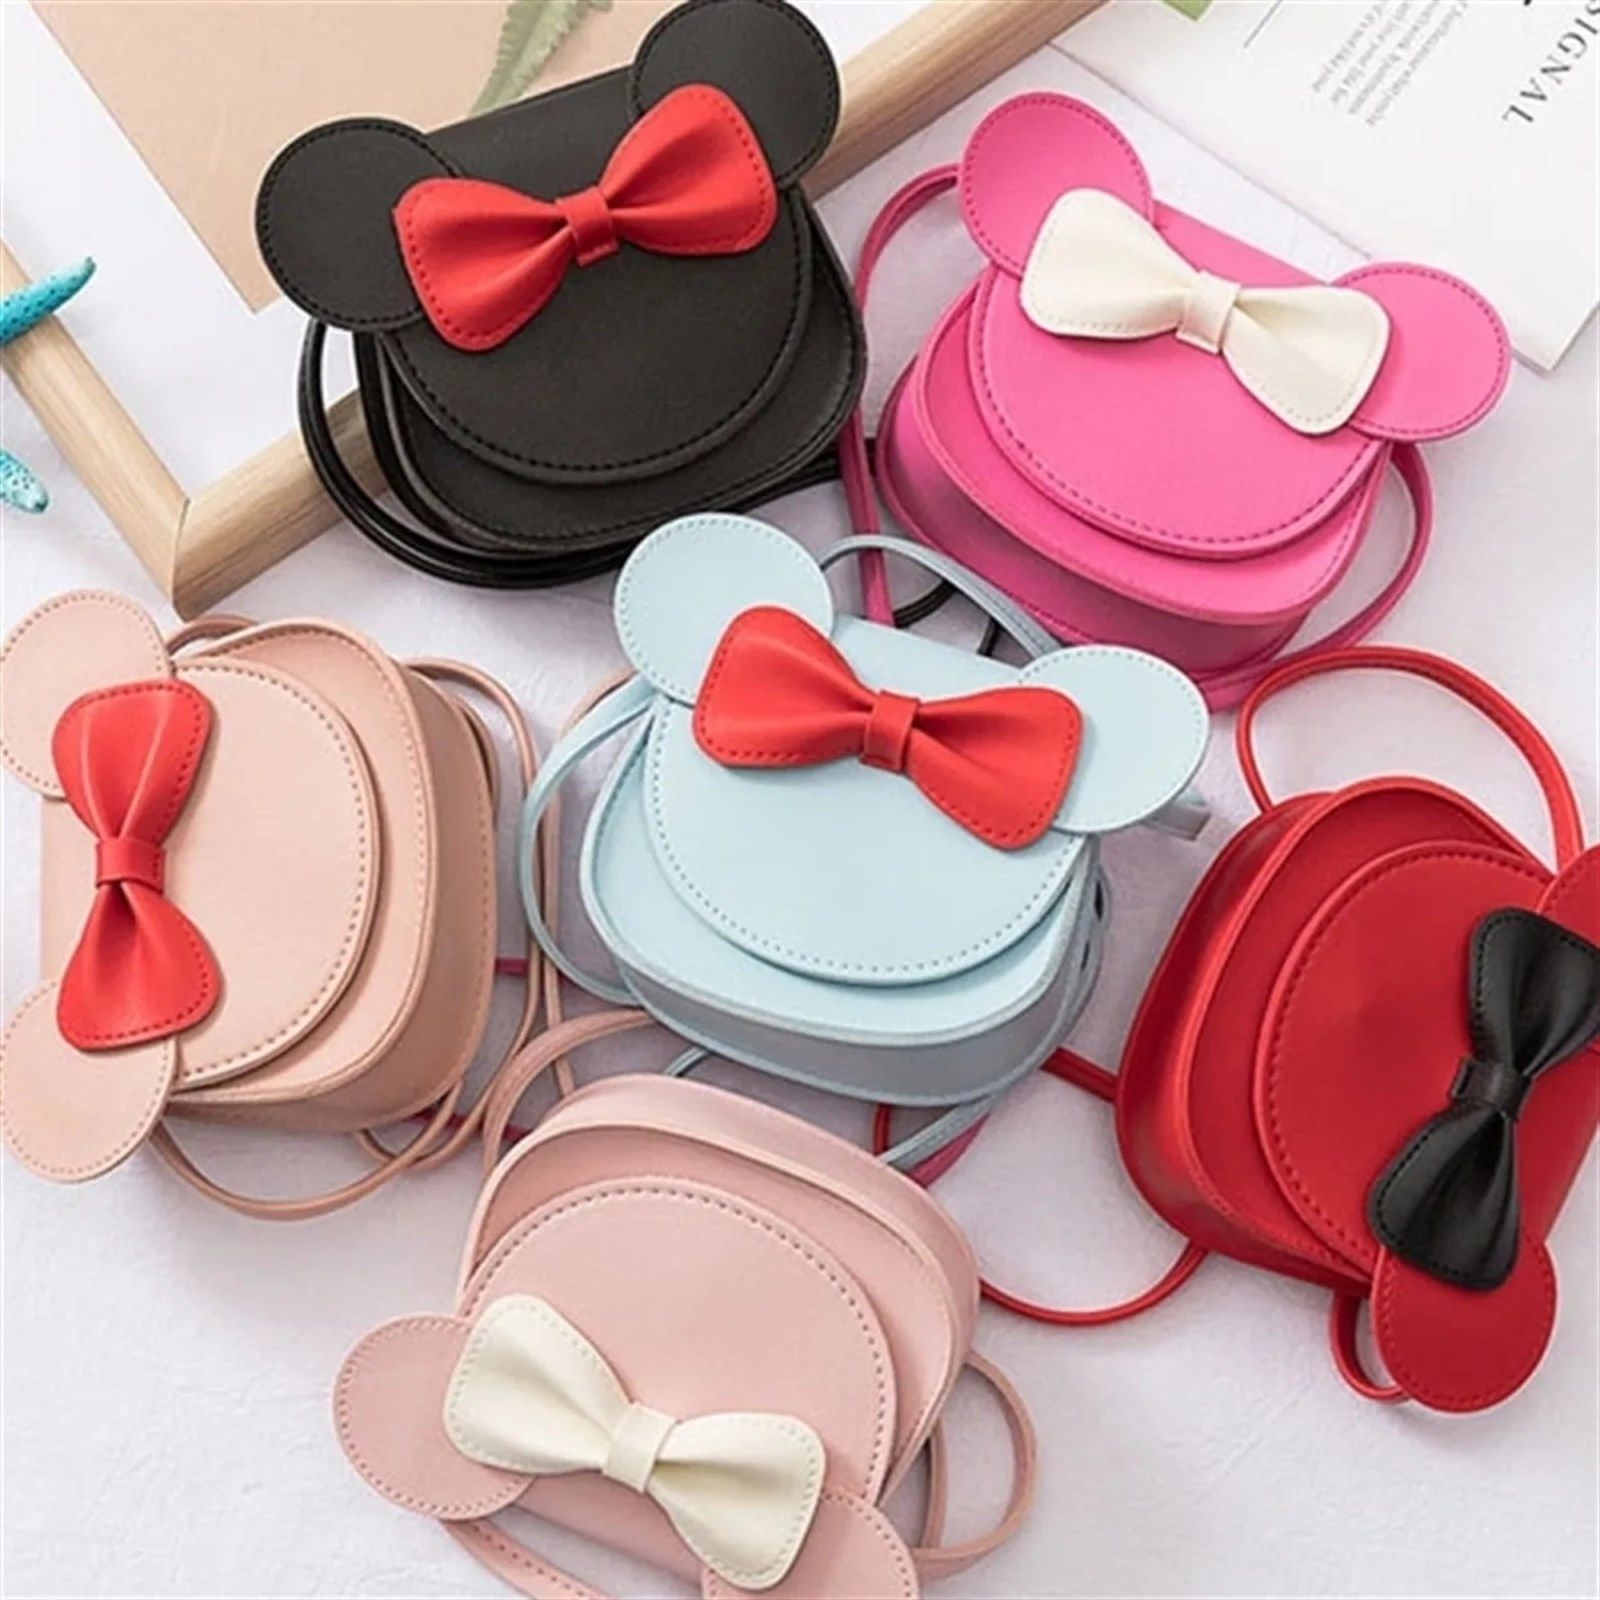 Bowknot Shoulder Bag With Cartoon Mouse Ears | Jane